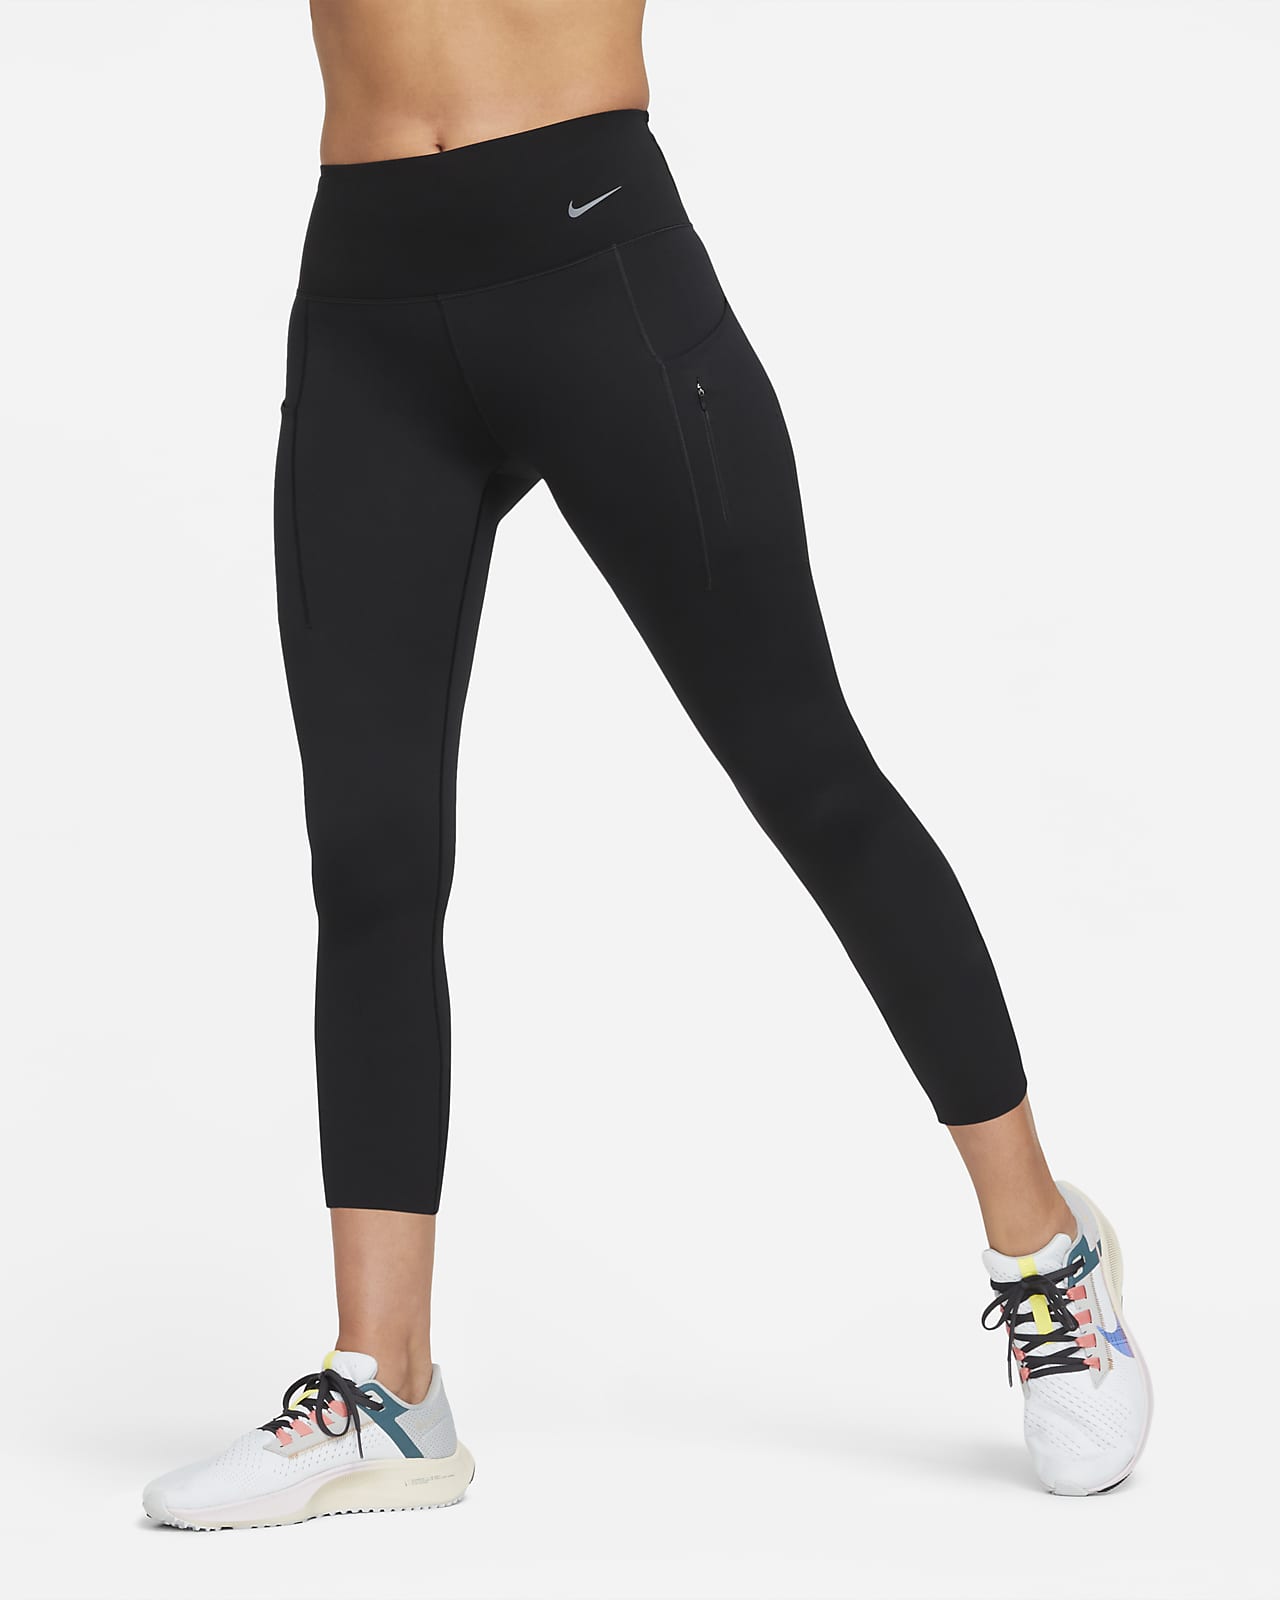 Why The Nike Go Leggings Should Be Your New Go-To Pair